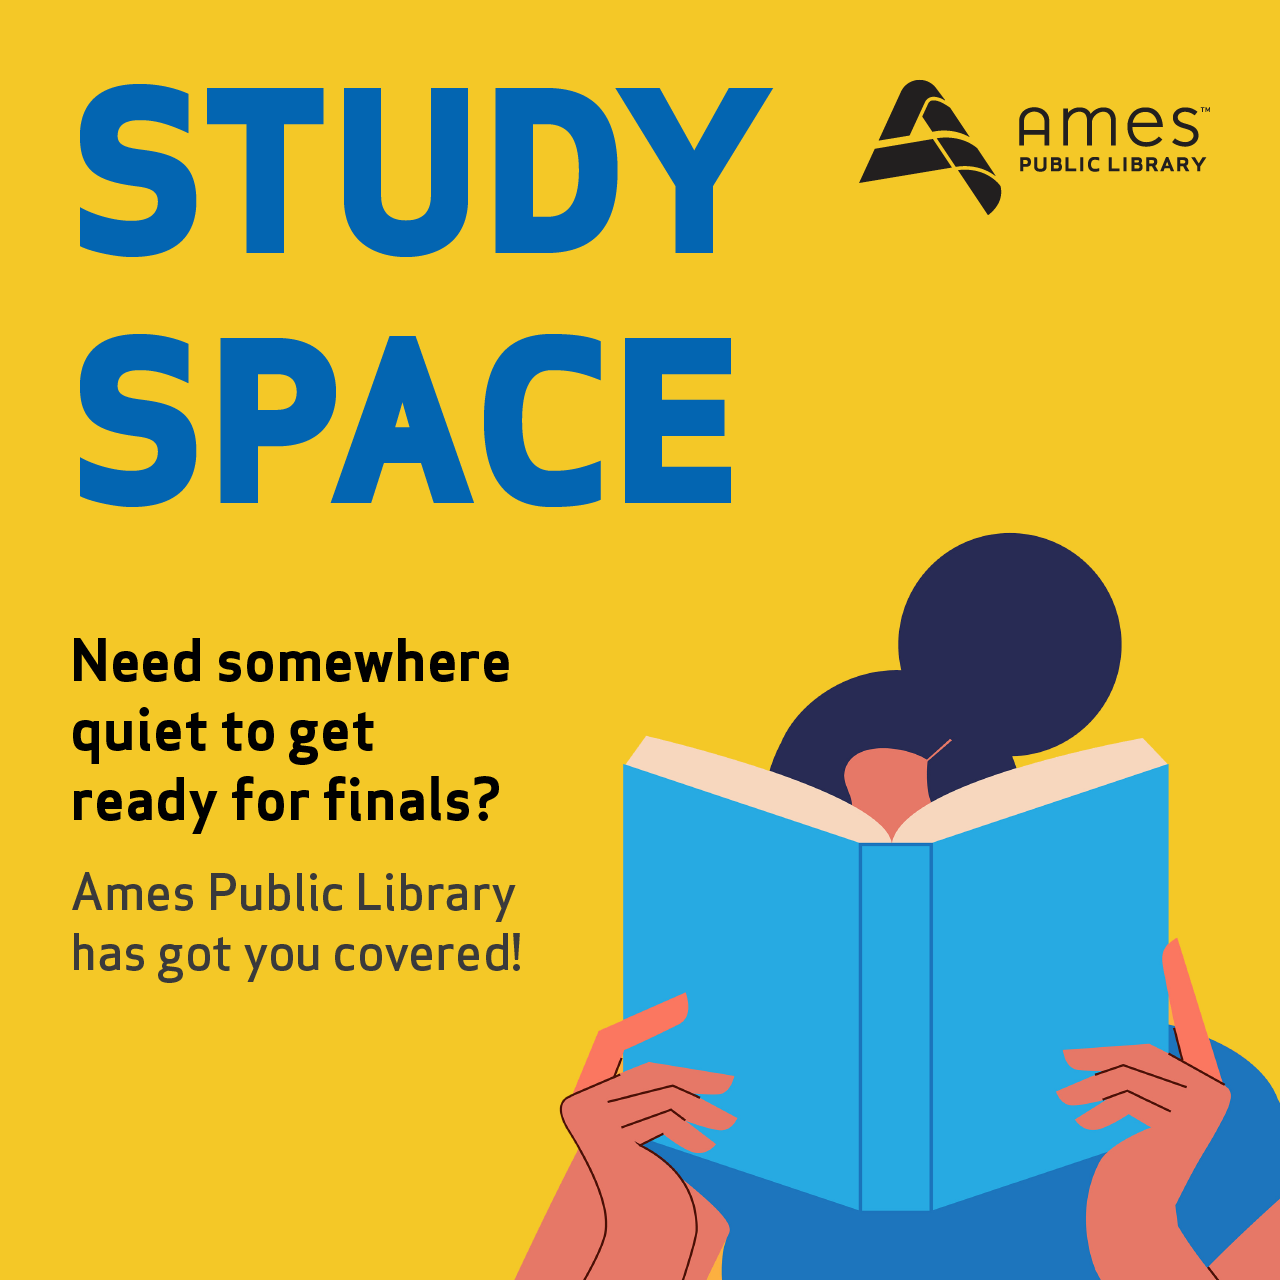 Study Space. Need Somewhere quiet to get ready for finals? Ames Public Library has got you covered.